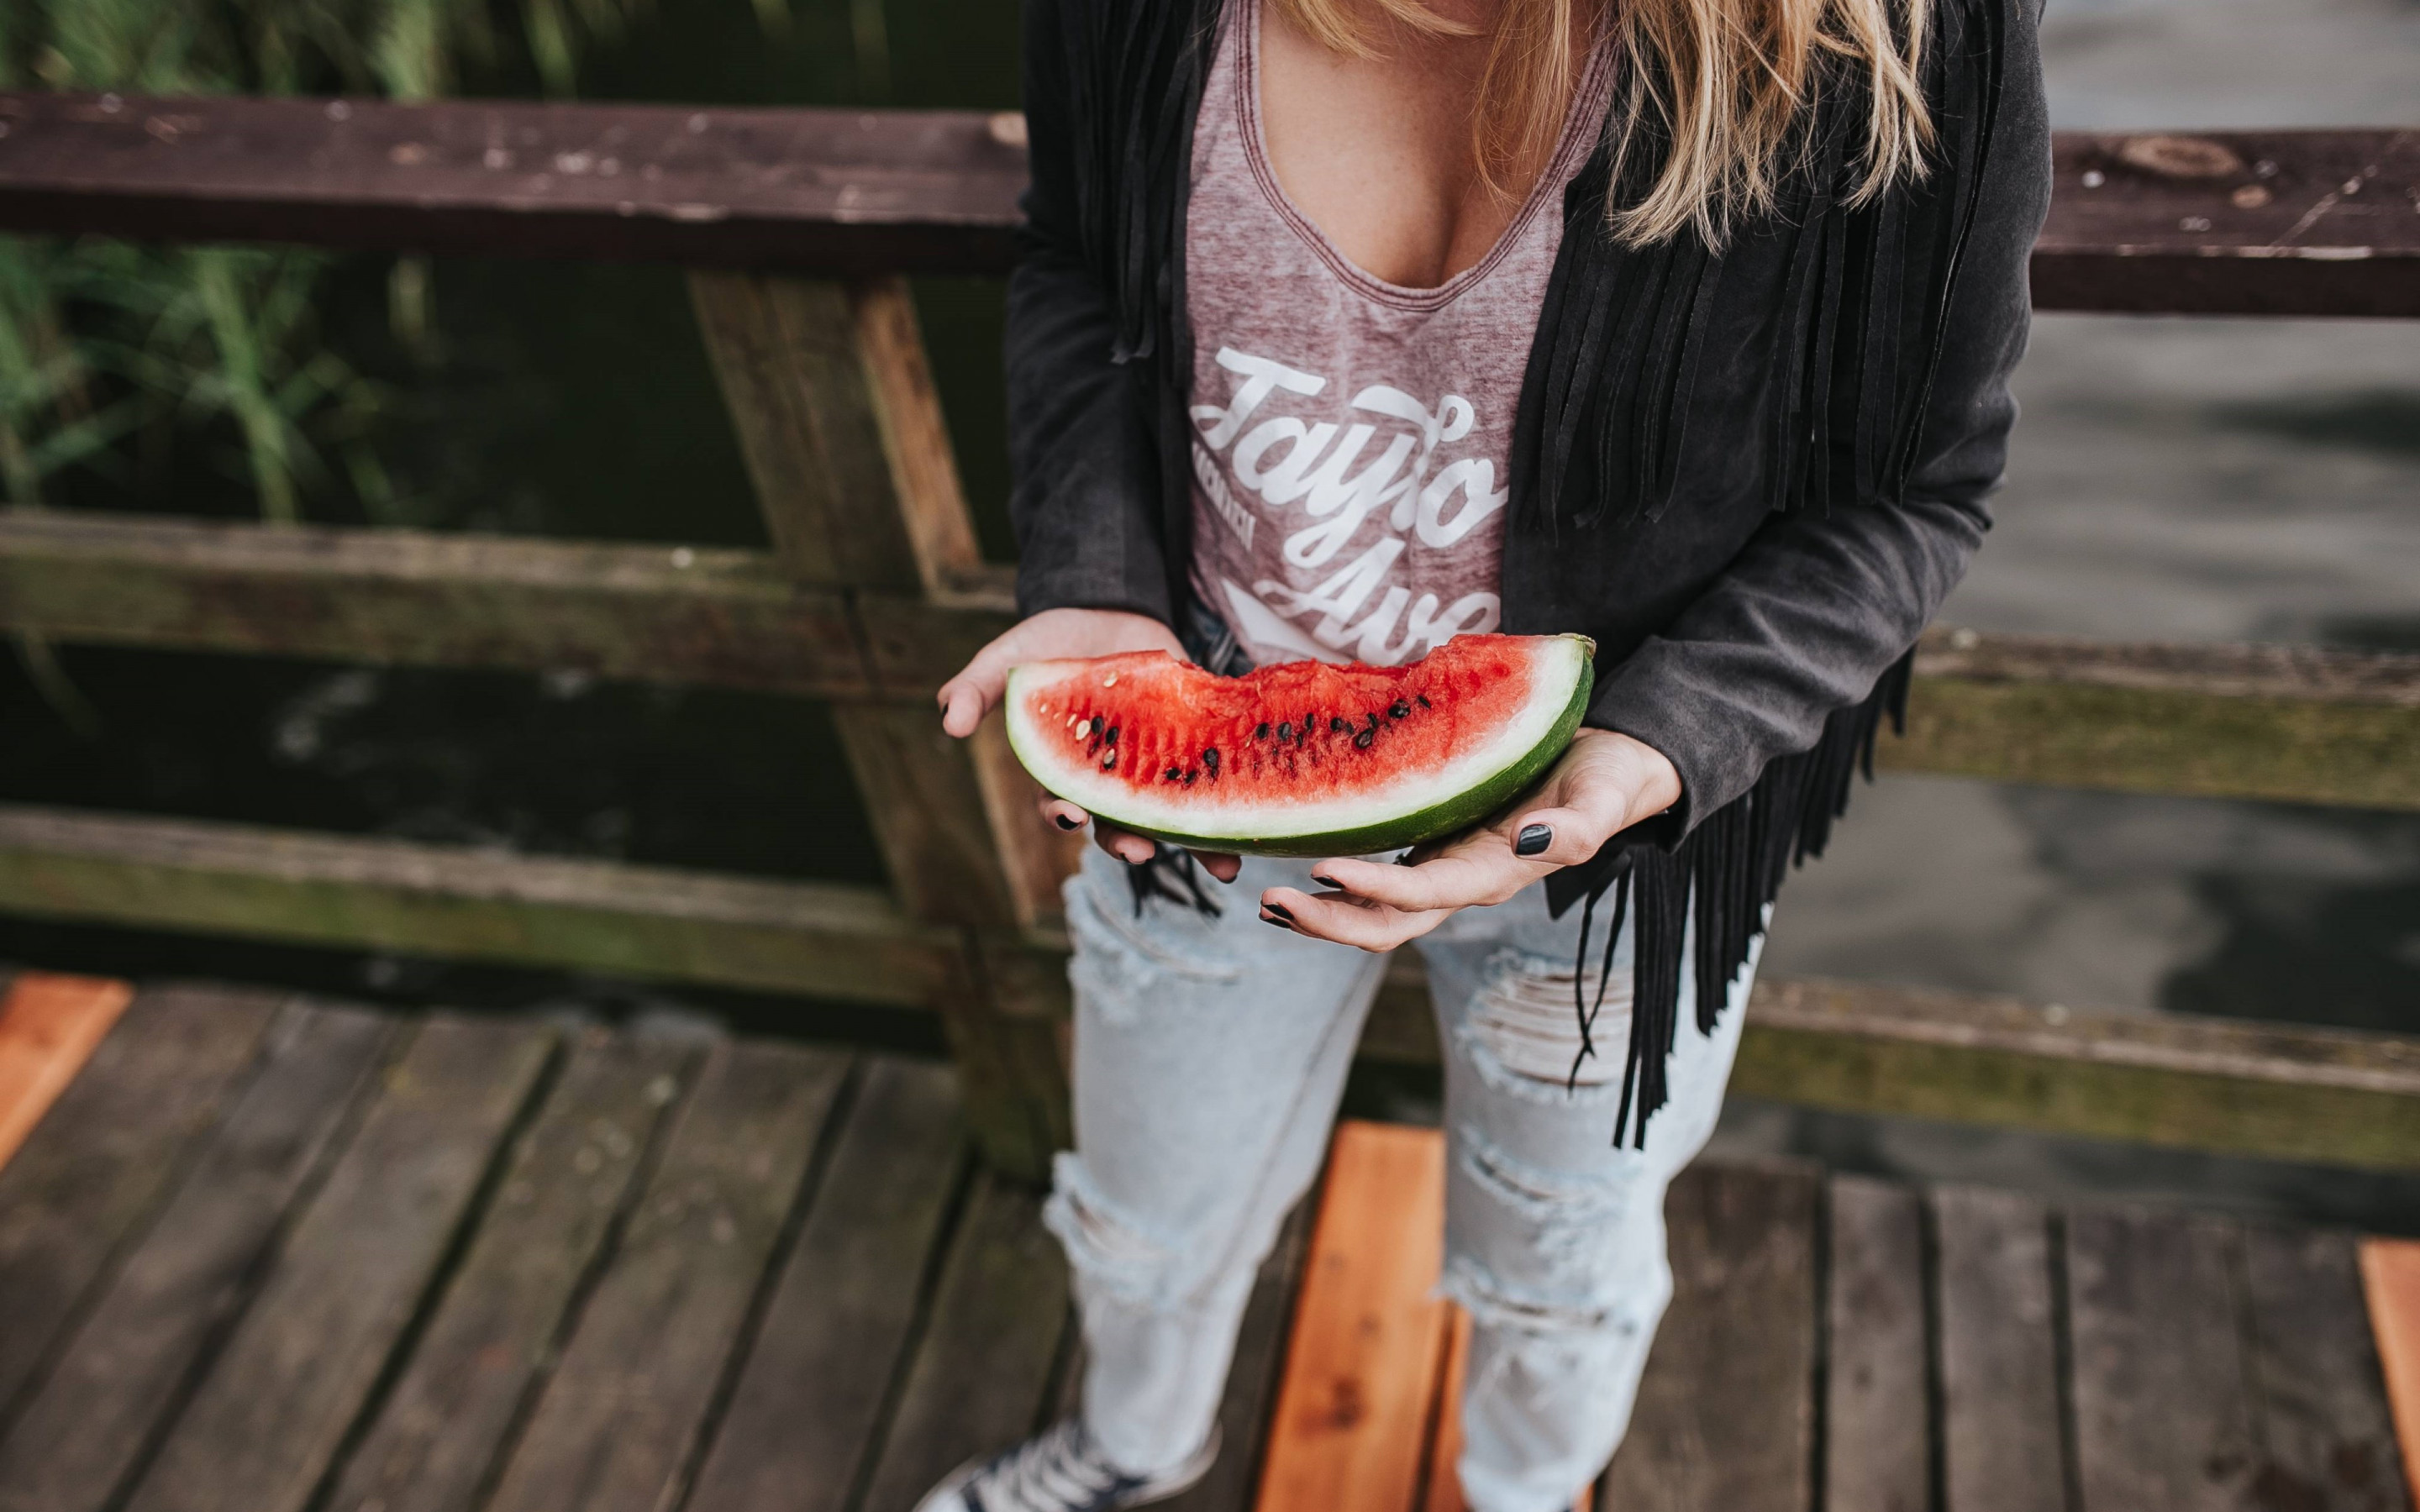 The girl with a watermelon slice wallpaper 2880x1800